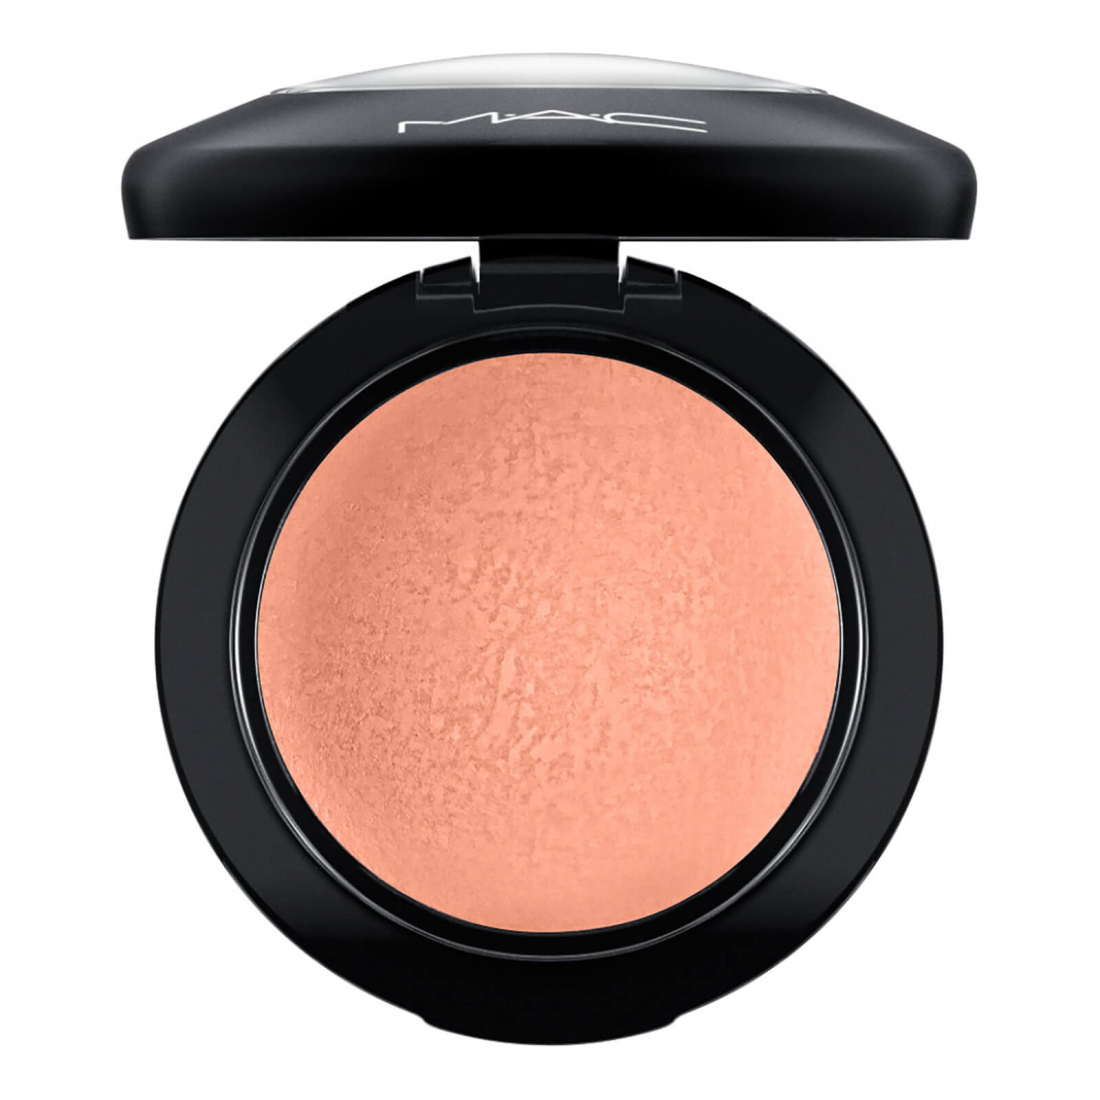 'Mineralize' Blush - Naturally Flawless 3.2 g